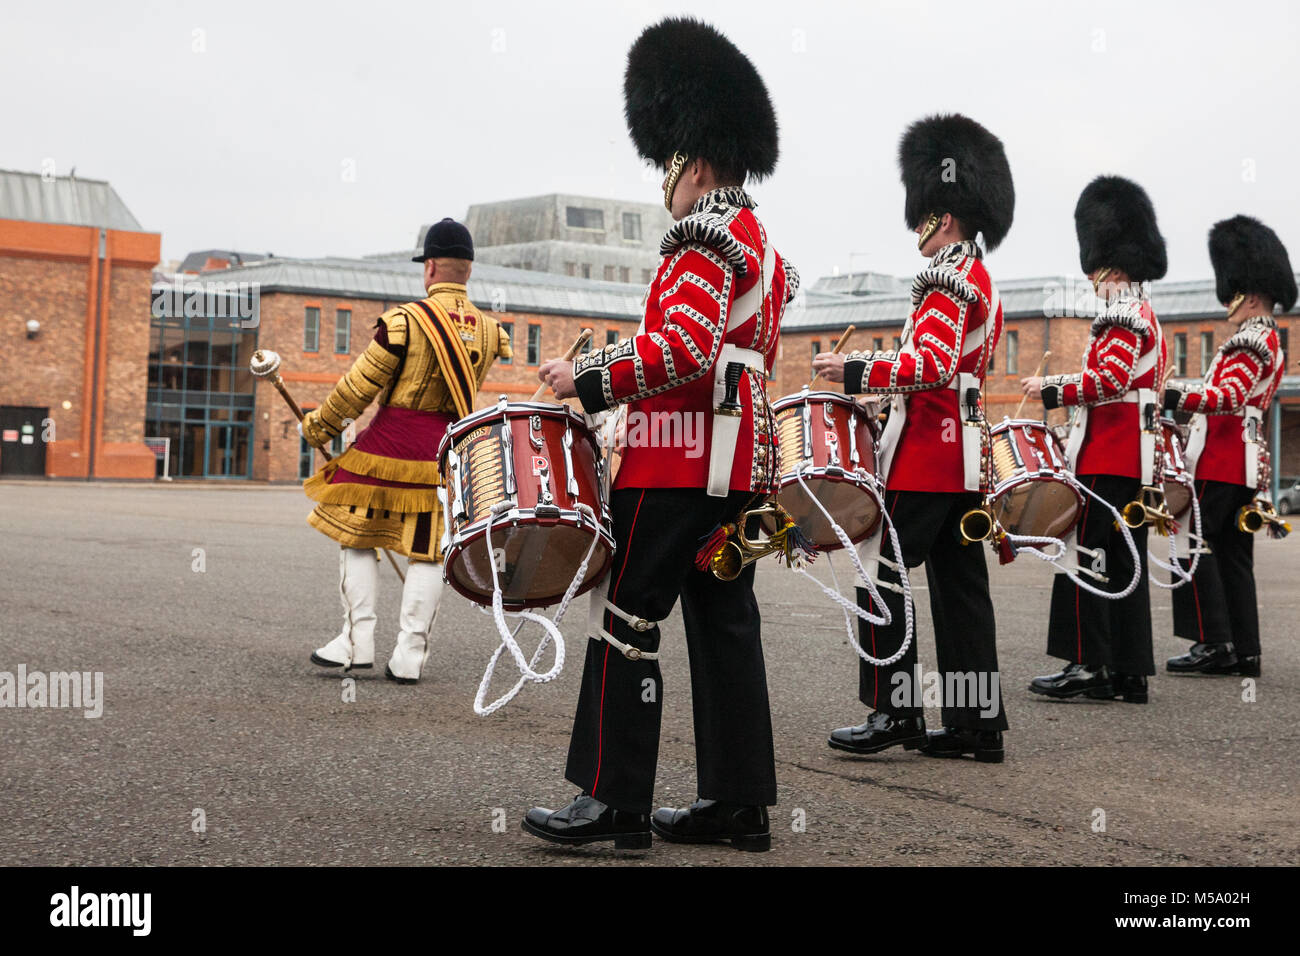 Windsor, UK. 21st February, 2018. Drum Major Liam Rowley leads the Drum Corps Coldstream Guards onto the parade ground to attend the Major General's Inspection of the 1st Battalion Coldstream Guards in preparation for the Queen's Birthday Parade. Soldiers are tested on military knowledge, history, values and standards and their uniforms, presentation and drill are minutely examined. Credit: Mark Kerrison/Alamy Live News Stock Photo